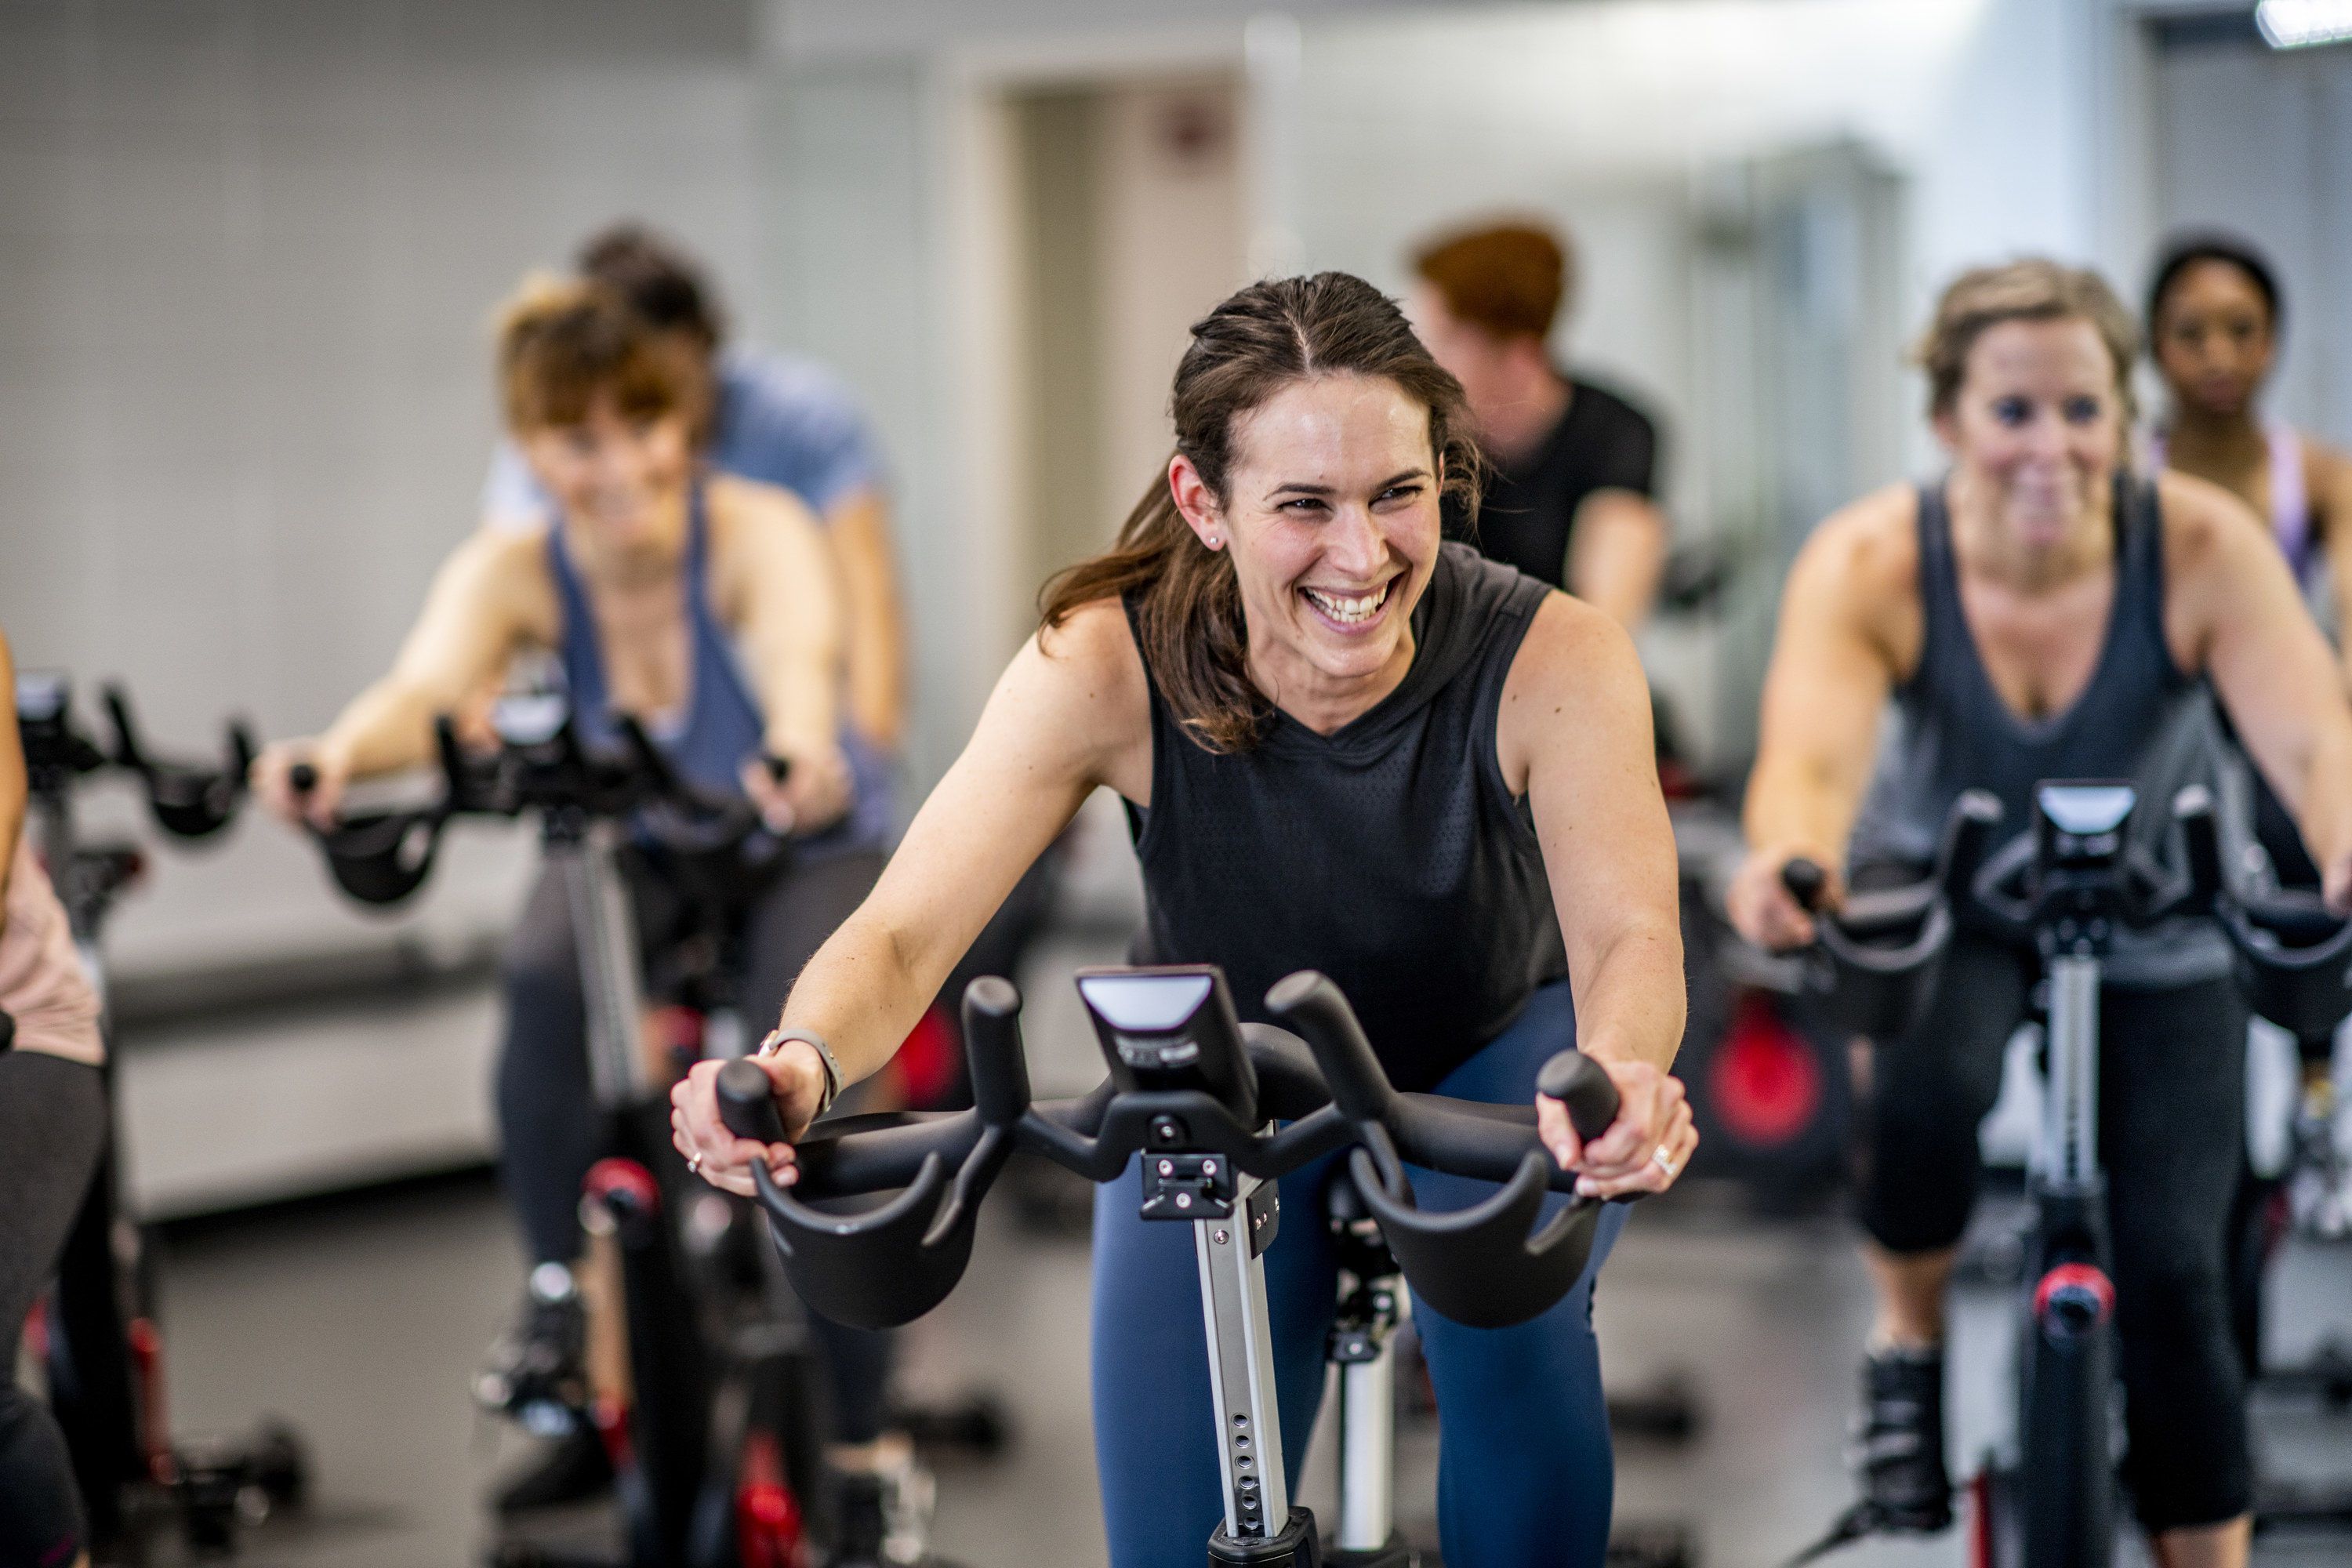 A woman smiles during a cycling class at the gym